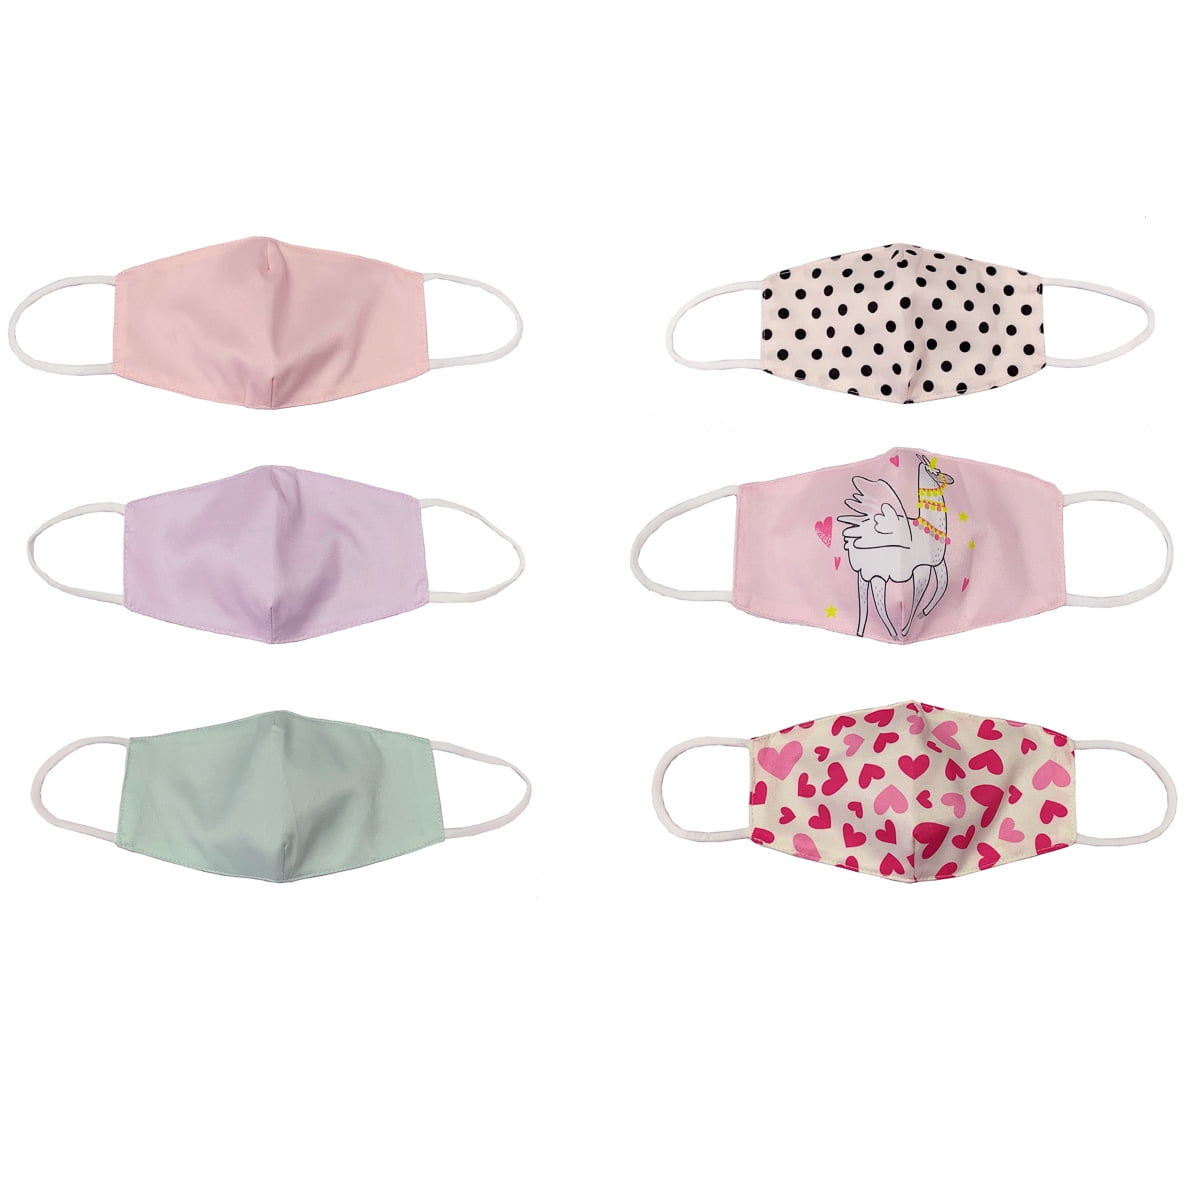 Childrens face covering Reusable Pink 